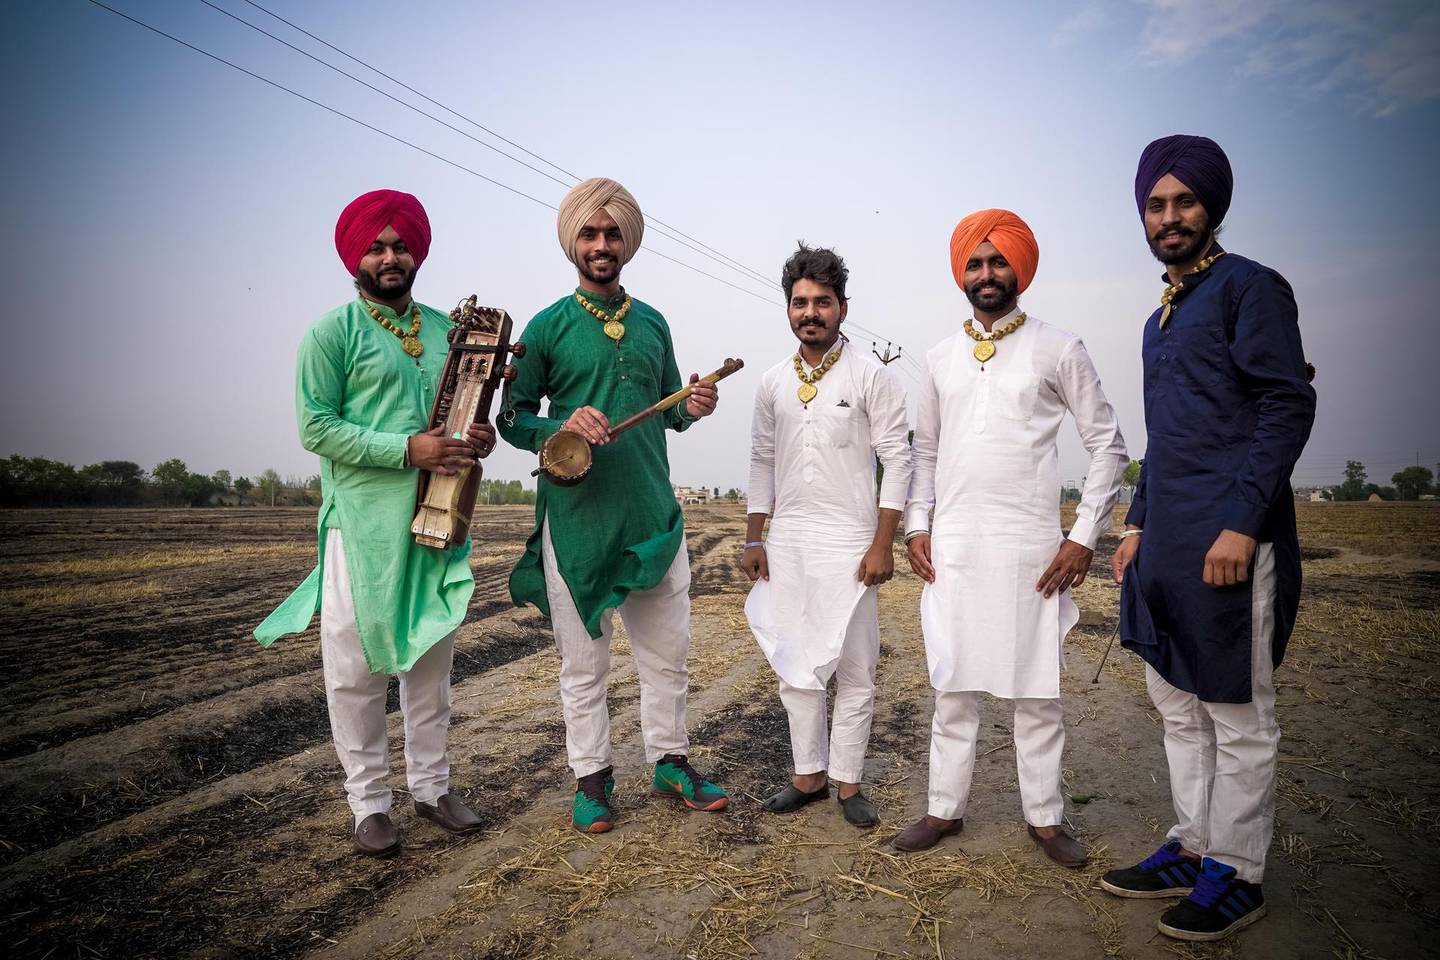 From left to right, Ajam Khan, Arshdeep, Inderjeet Singh, Maninderpal Singh, Jaskarn Singh form Rang le Sardaar. The group is one of the many folk music groups that is supported by the Anahad Foundation. 